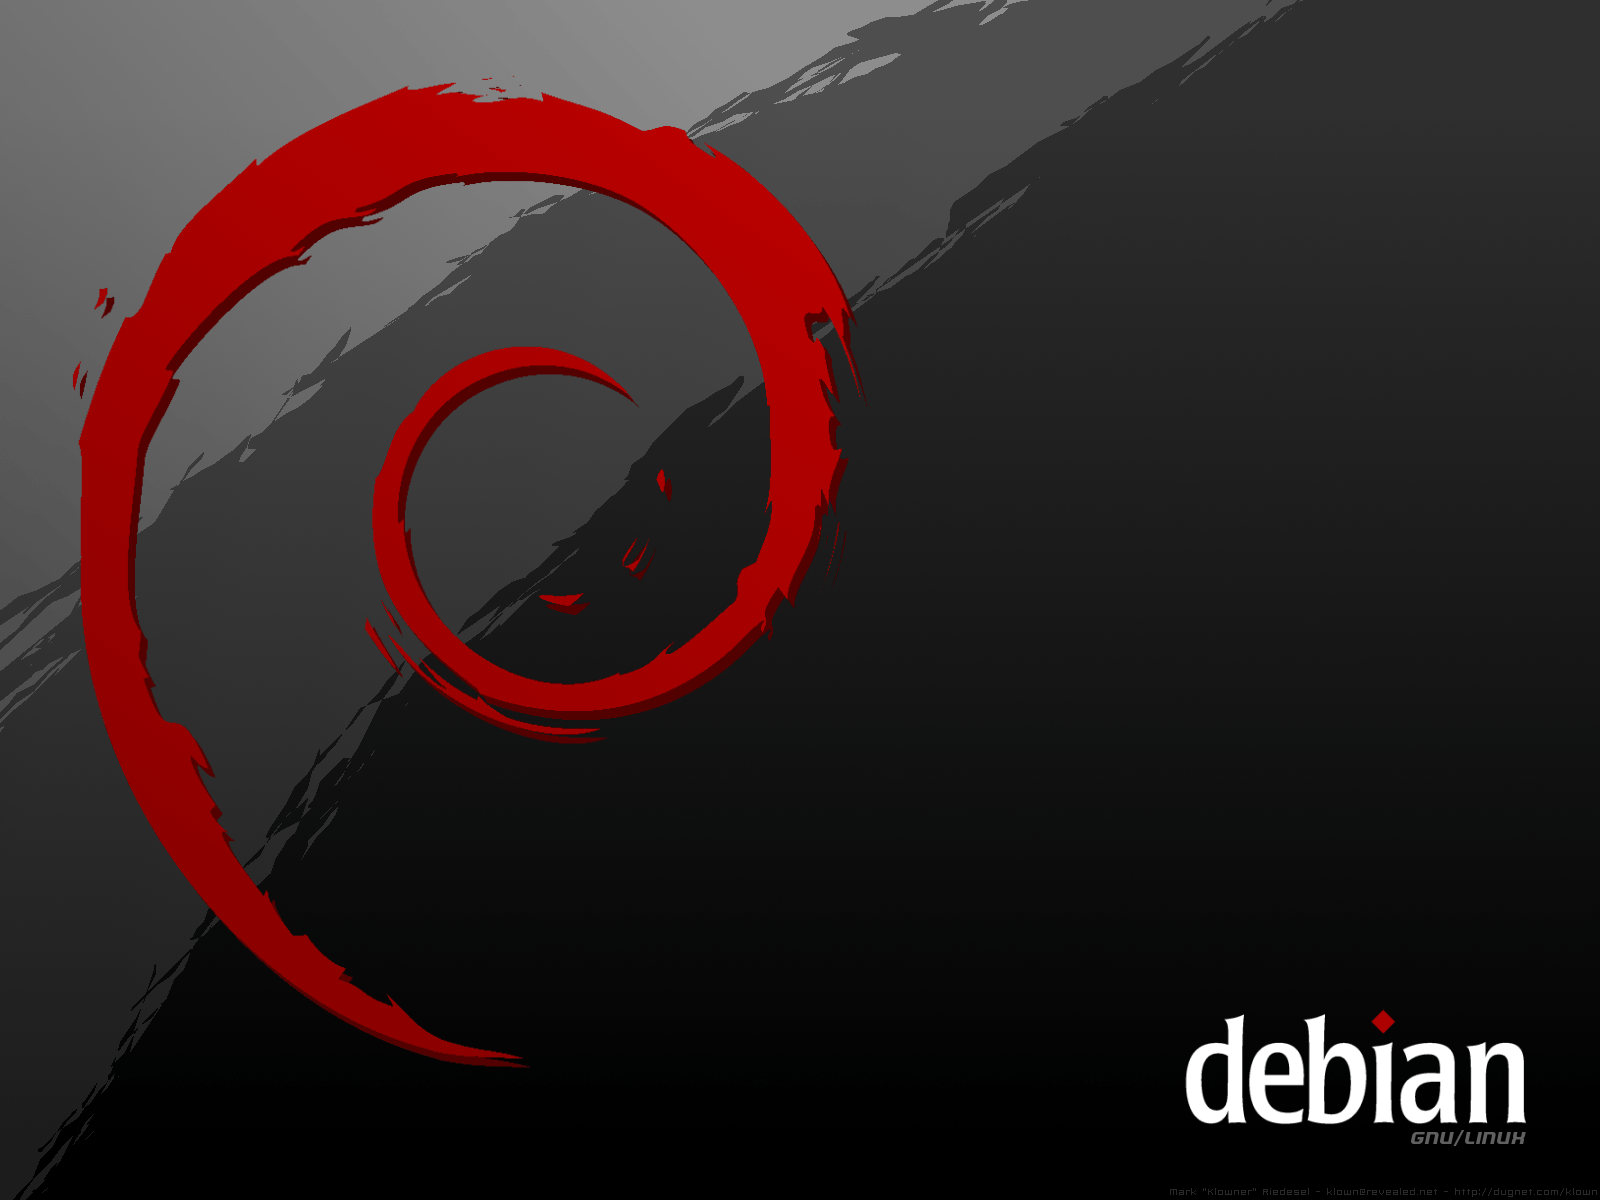 The Swirl of Debian" wallpapers at klowner